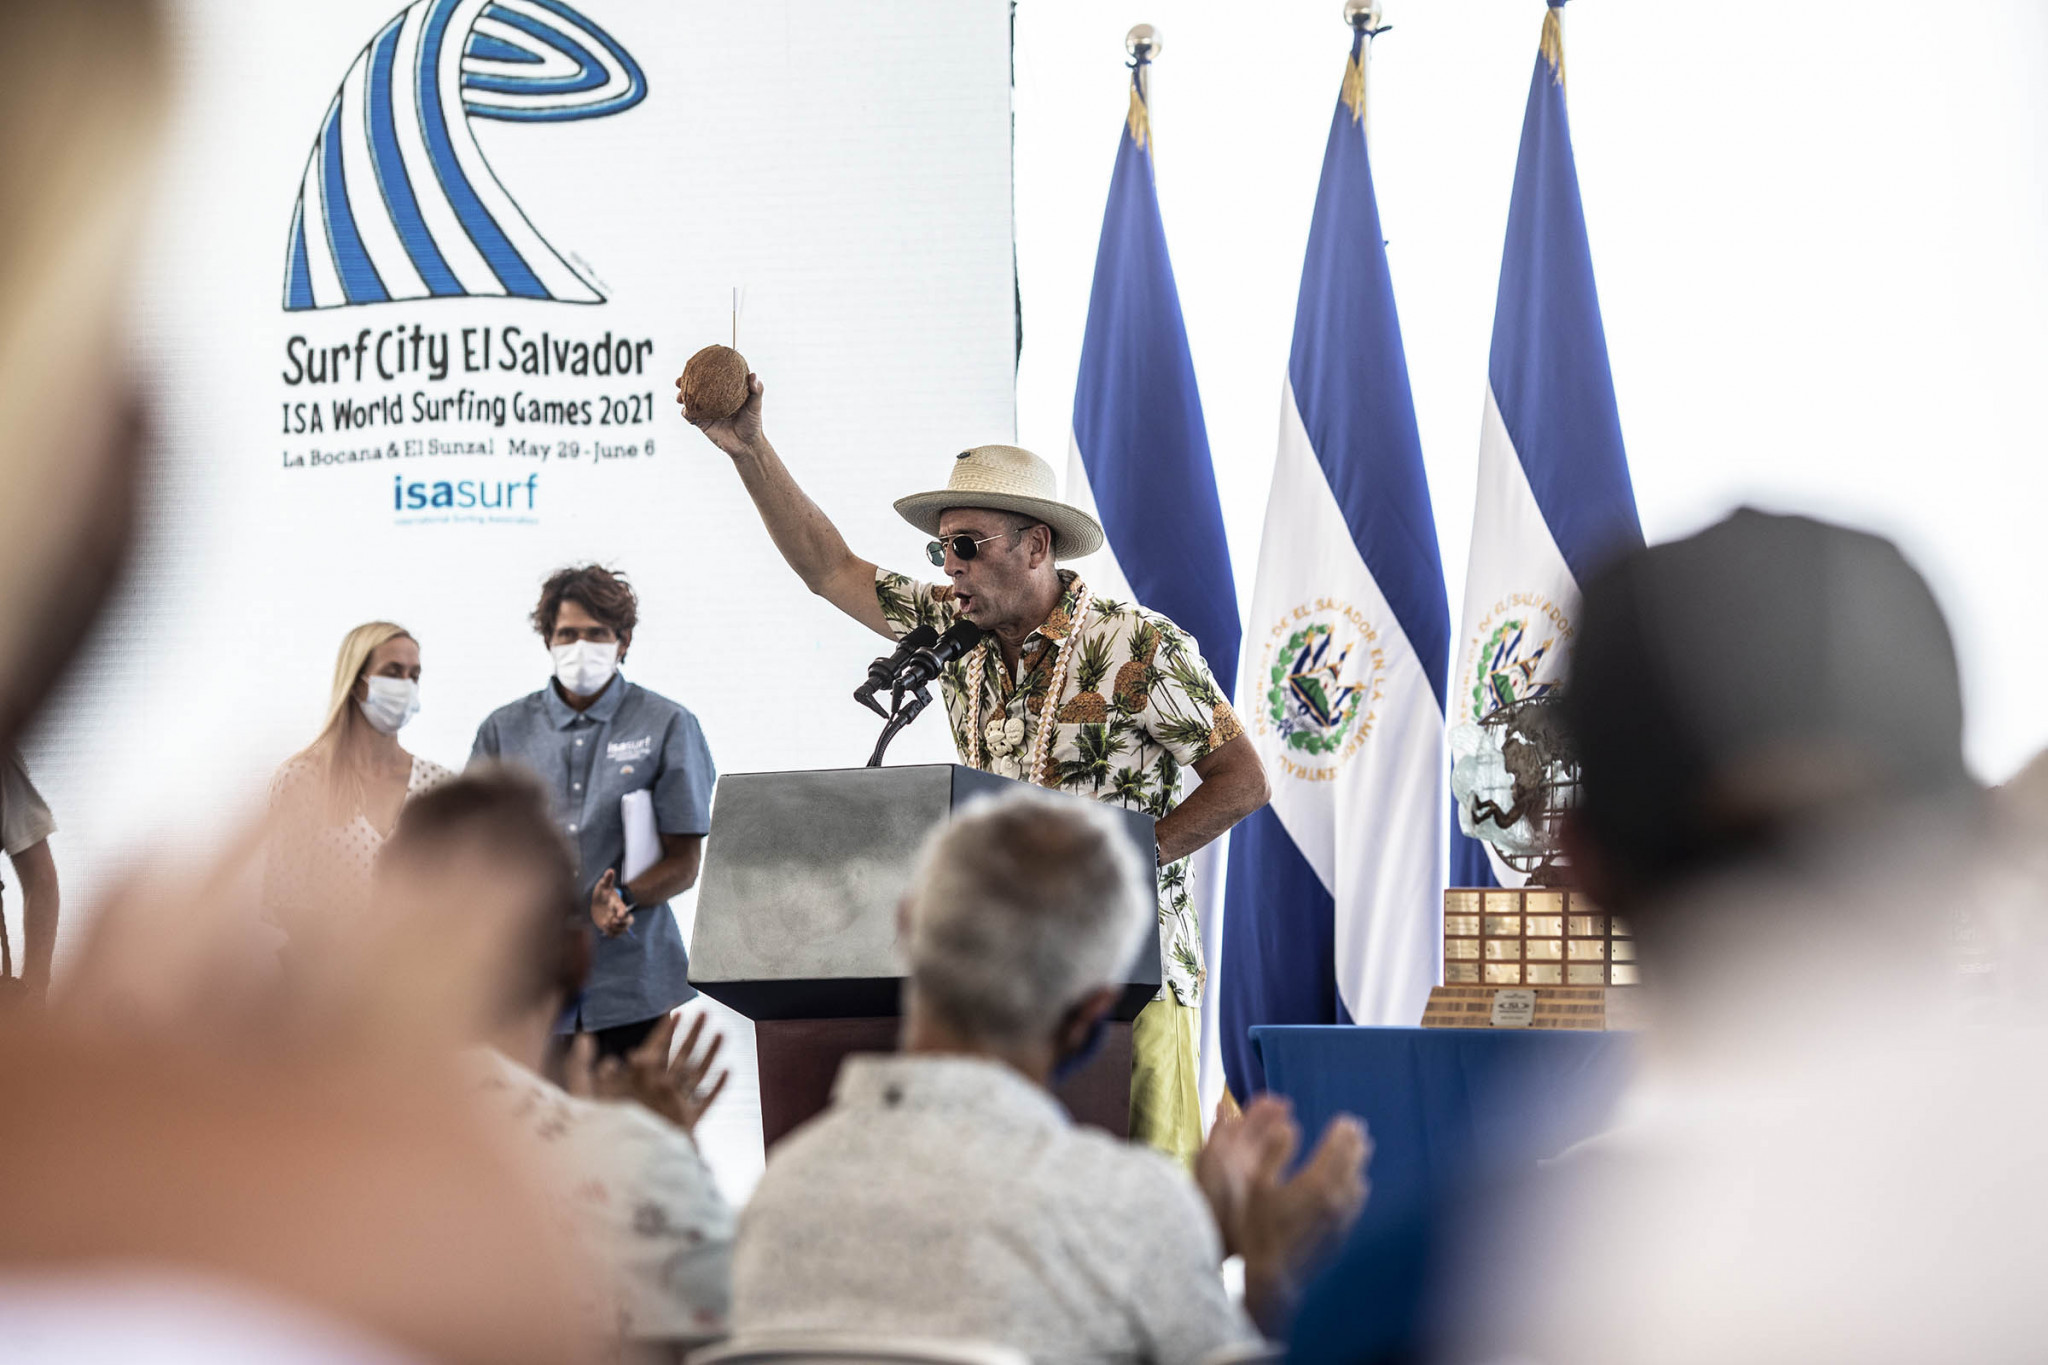 ISA President Fernando Aguerre has backed the World Surfing Games to 